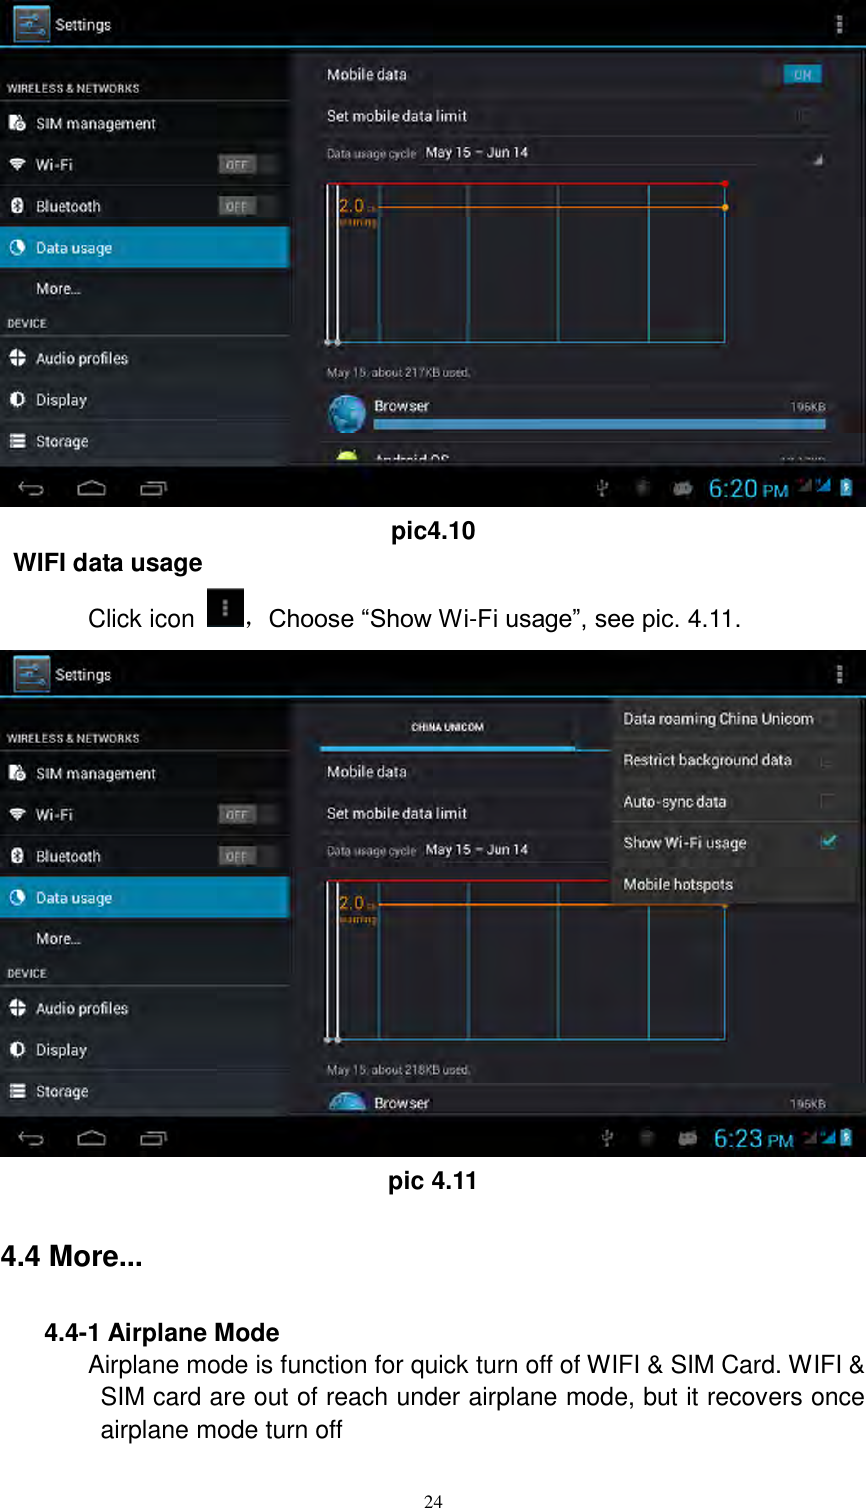      24  pic4.10  WIFI data usage Click icon  ，Choose “Show Wi-Fi usage”, see pic. 4.11.  pic 4.11 4.4 More... 4.4-1 Airplane Mode Airplane mode is function for quick turn off of WIFI &amp; SIM Card. WIFI &amp; SIM card are out of reach under airplane mode, but it recovers once airplane mode turn off  